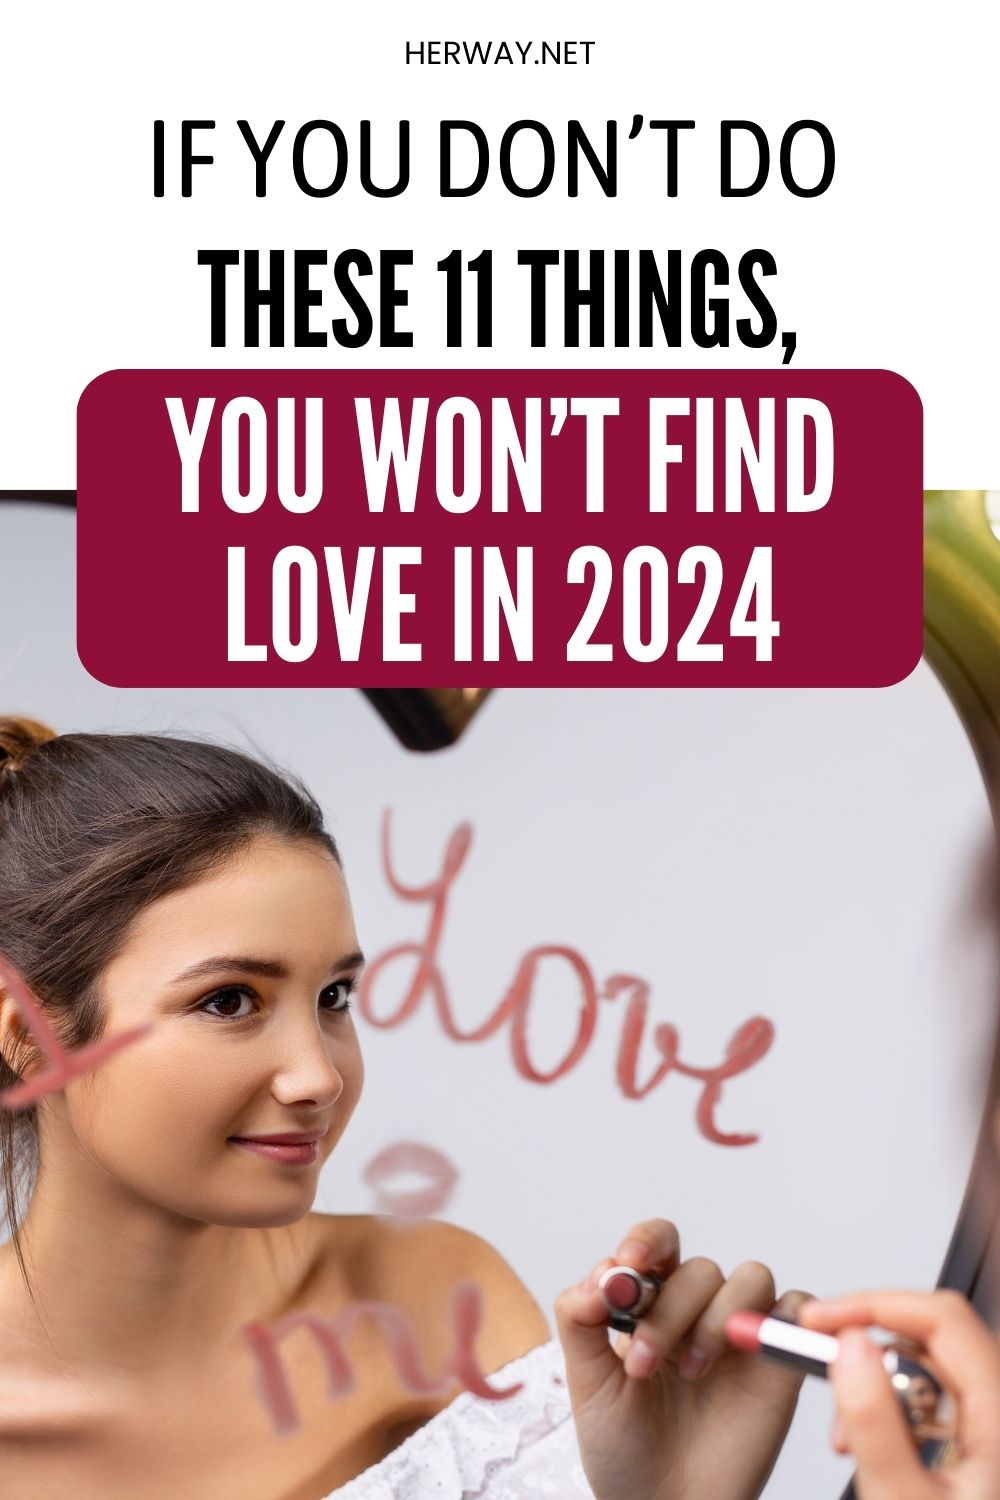 If You Don’t Do These 11 Things, You Won’t Find Love In 2024 